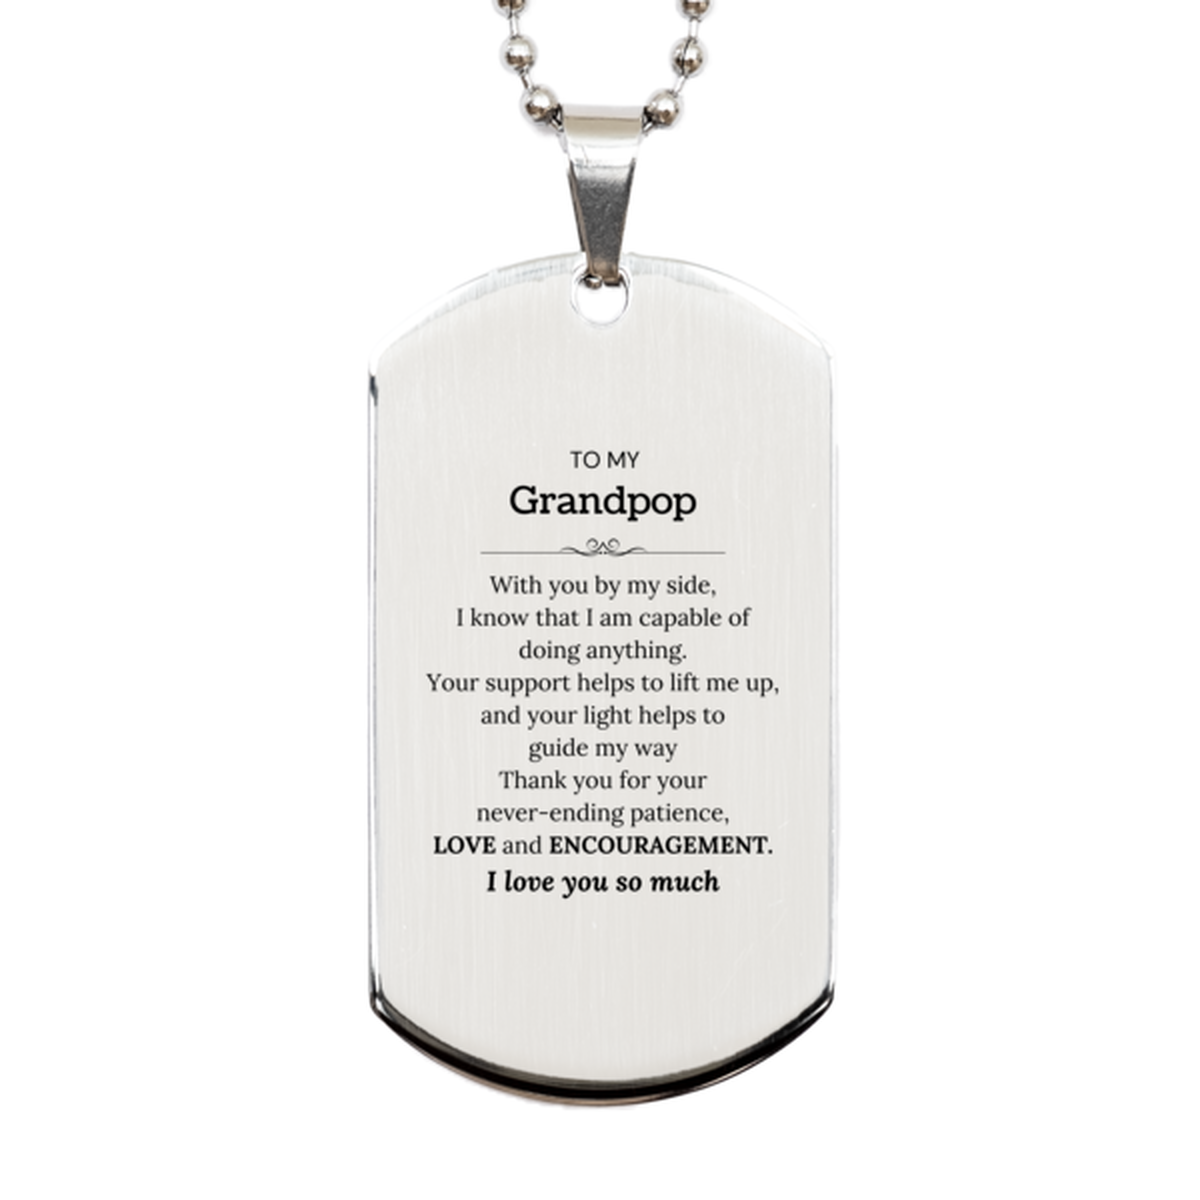 Appreciation Grandpop Silver Dog Tag Gifts, To My Grandpop Birthday Christmas Wedding Keepsake Gifts for Grandpop With you by my side, I know that I am capable of doing anything. I love you so much